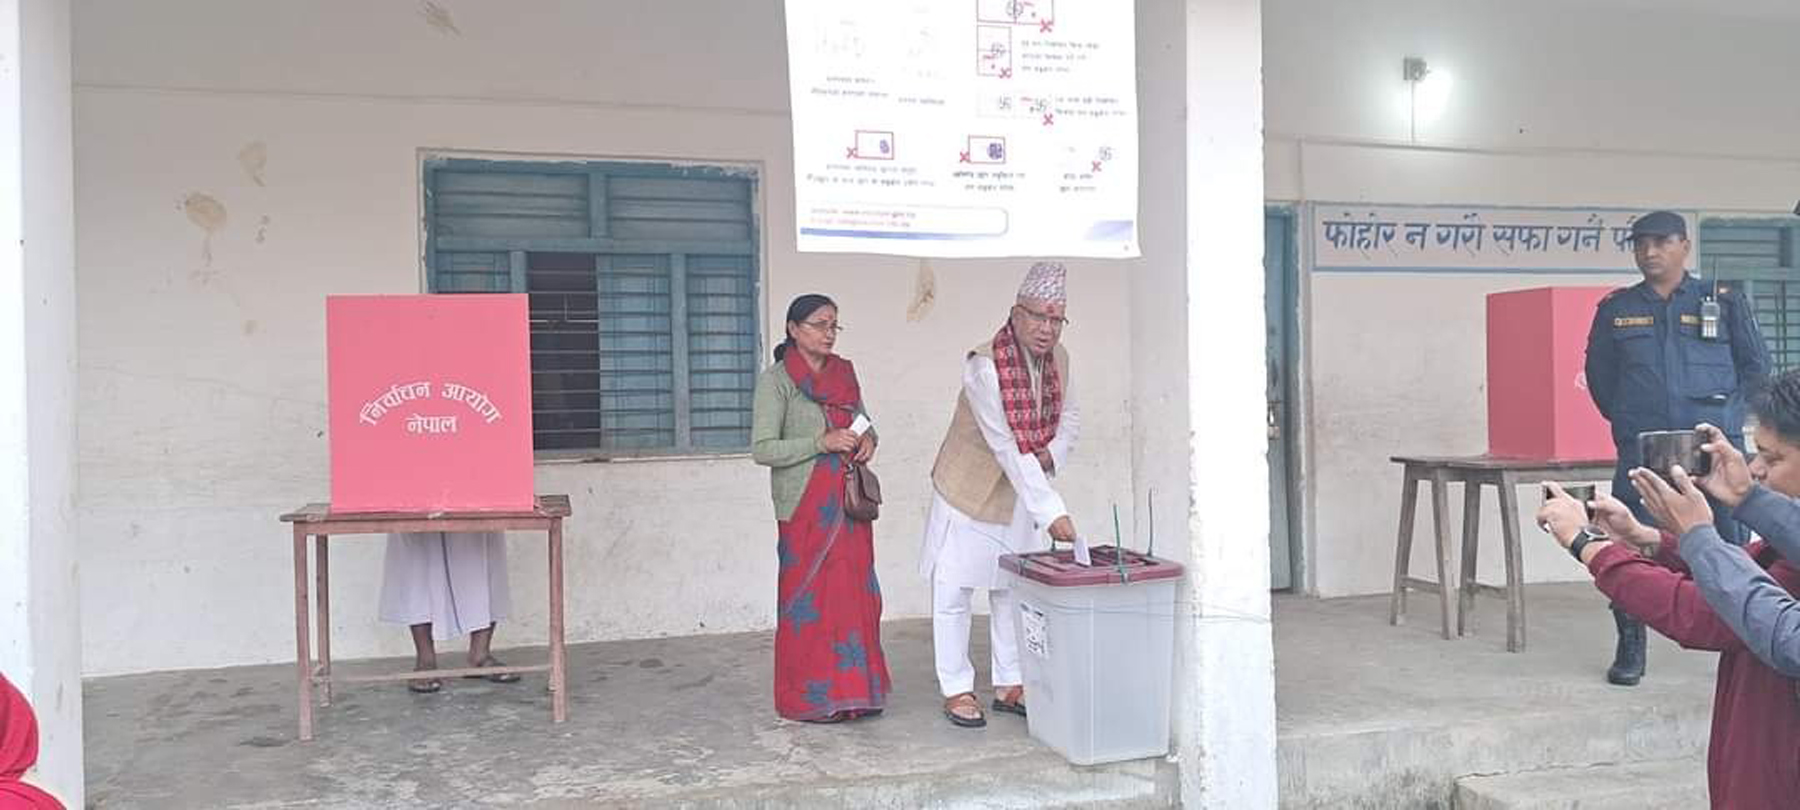 Former PM Nepal and NC senior leader Paudel cast their votes